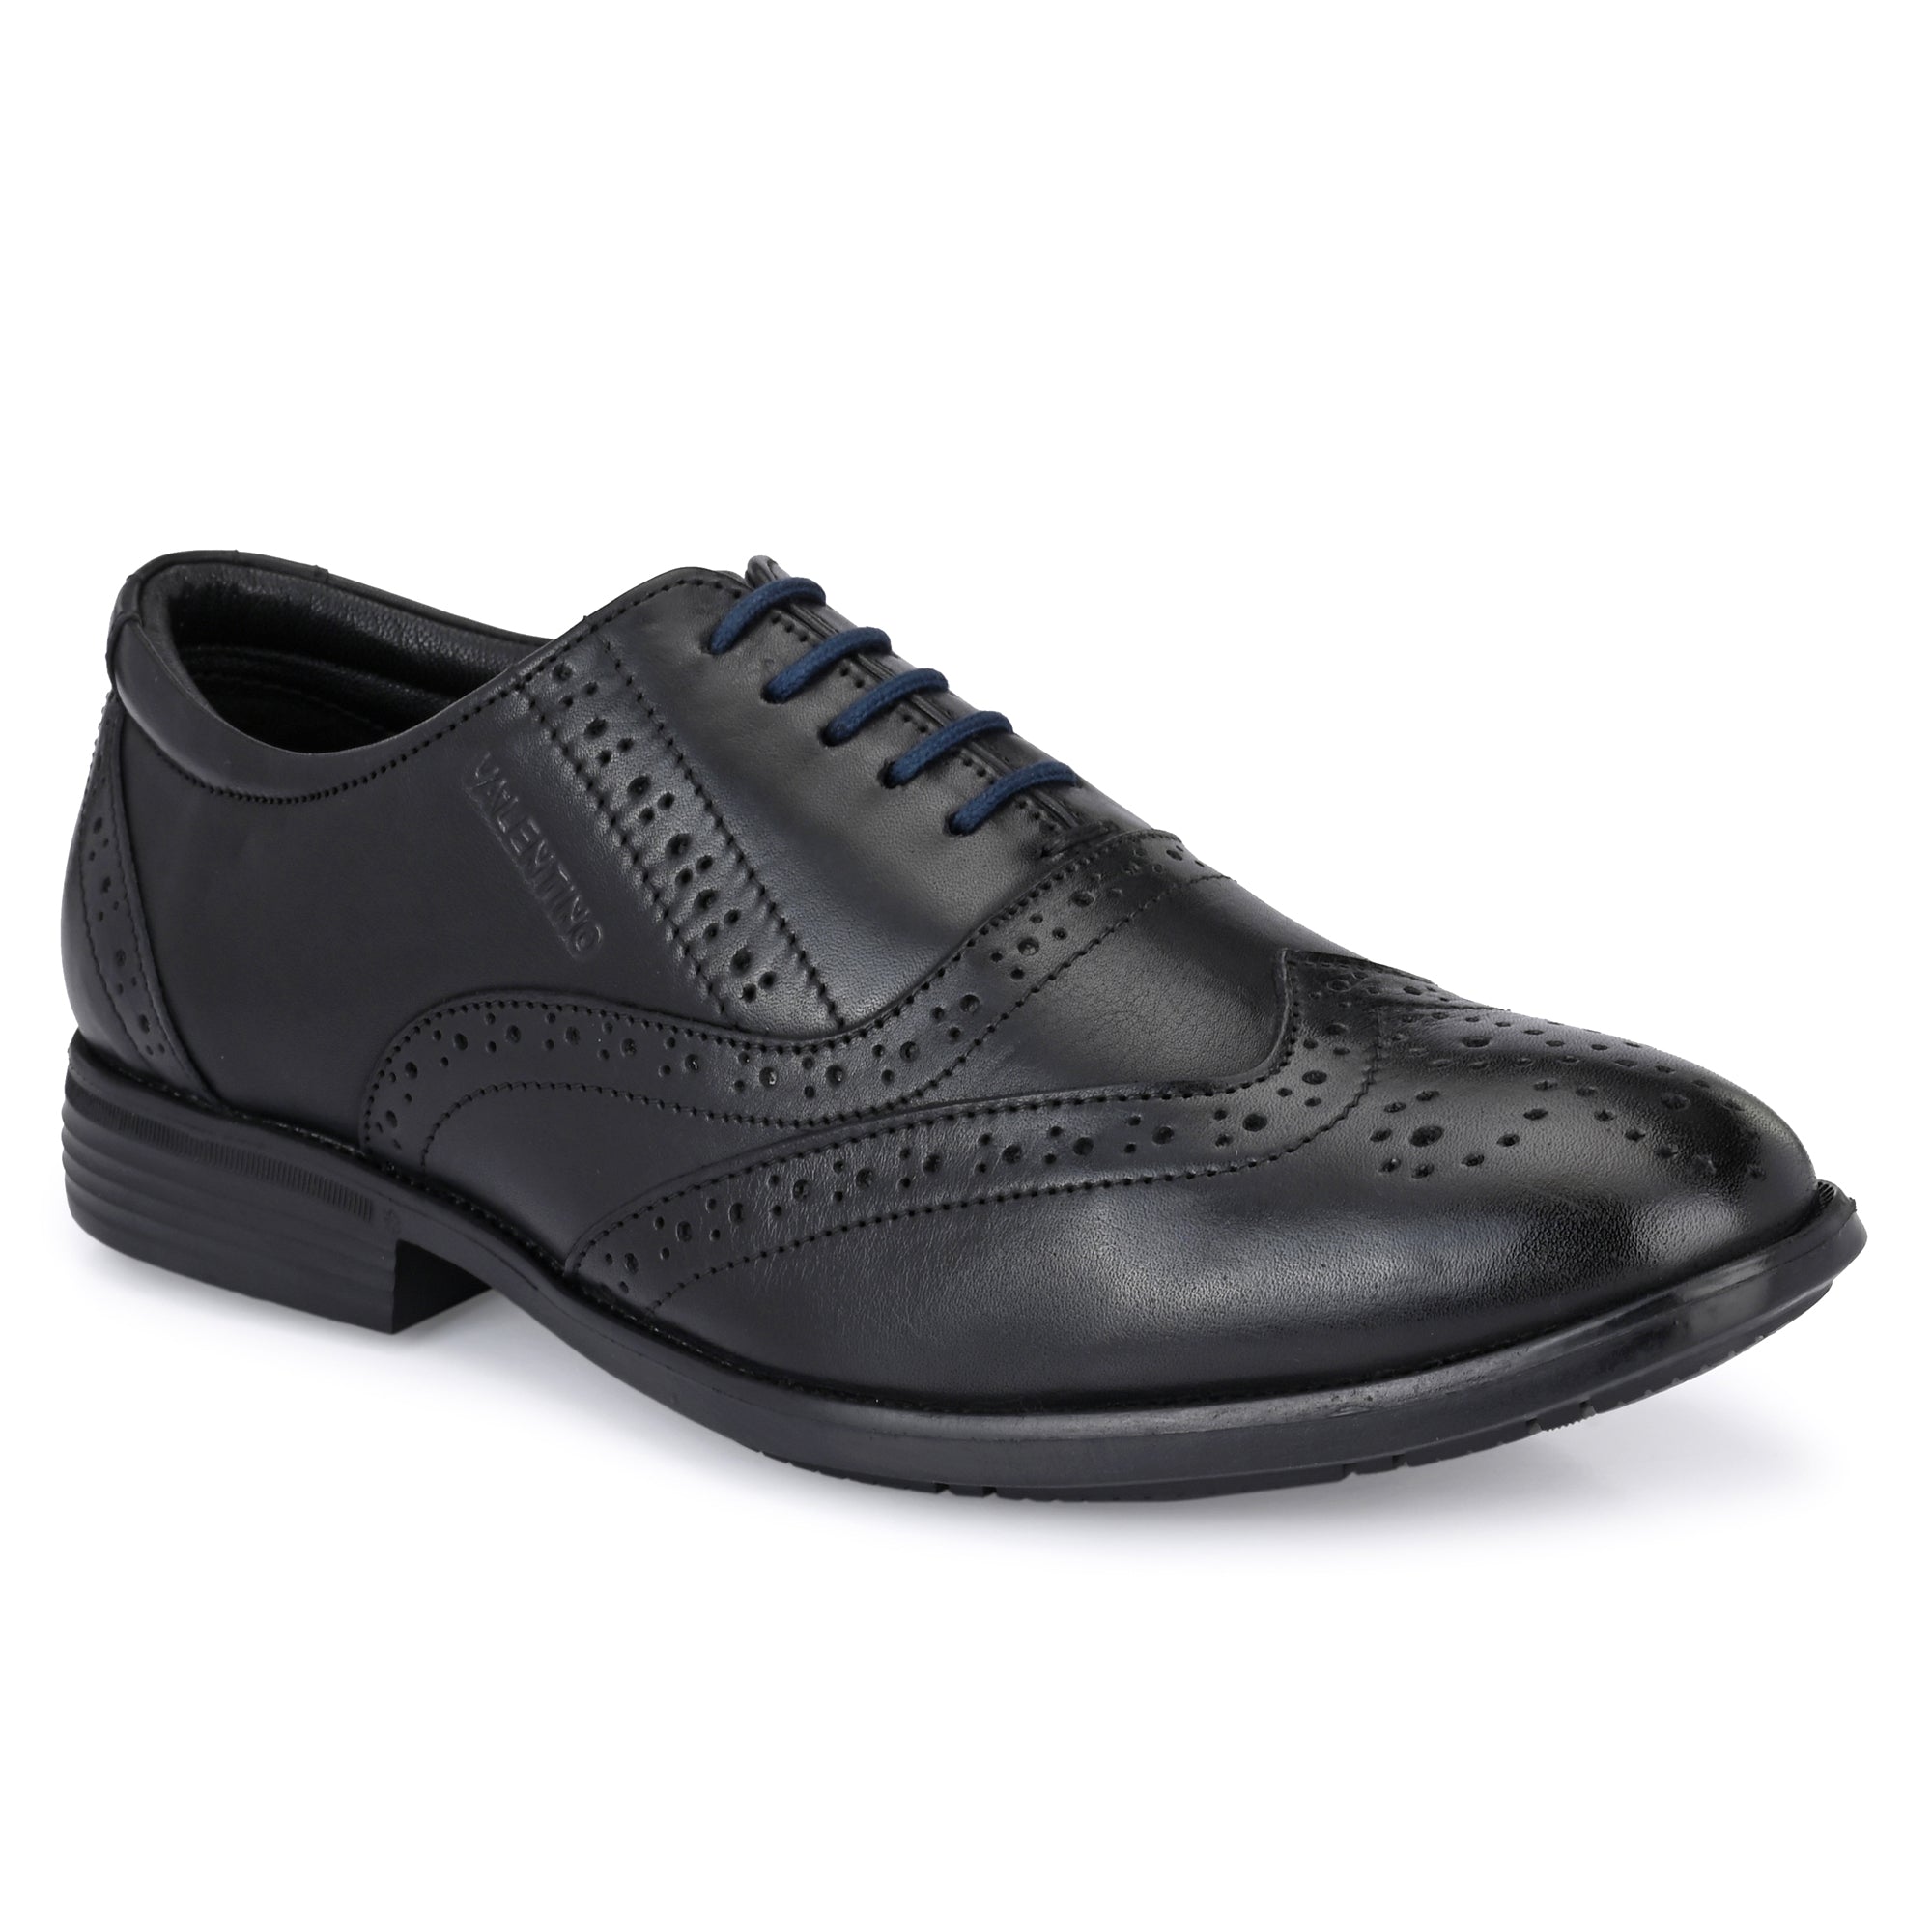 COSMO-70 MEN LEATHER BLACK FORMAL LACE UP DERBY